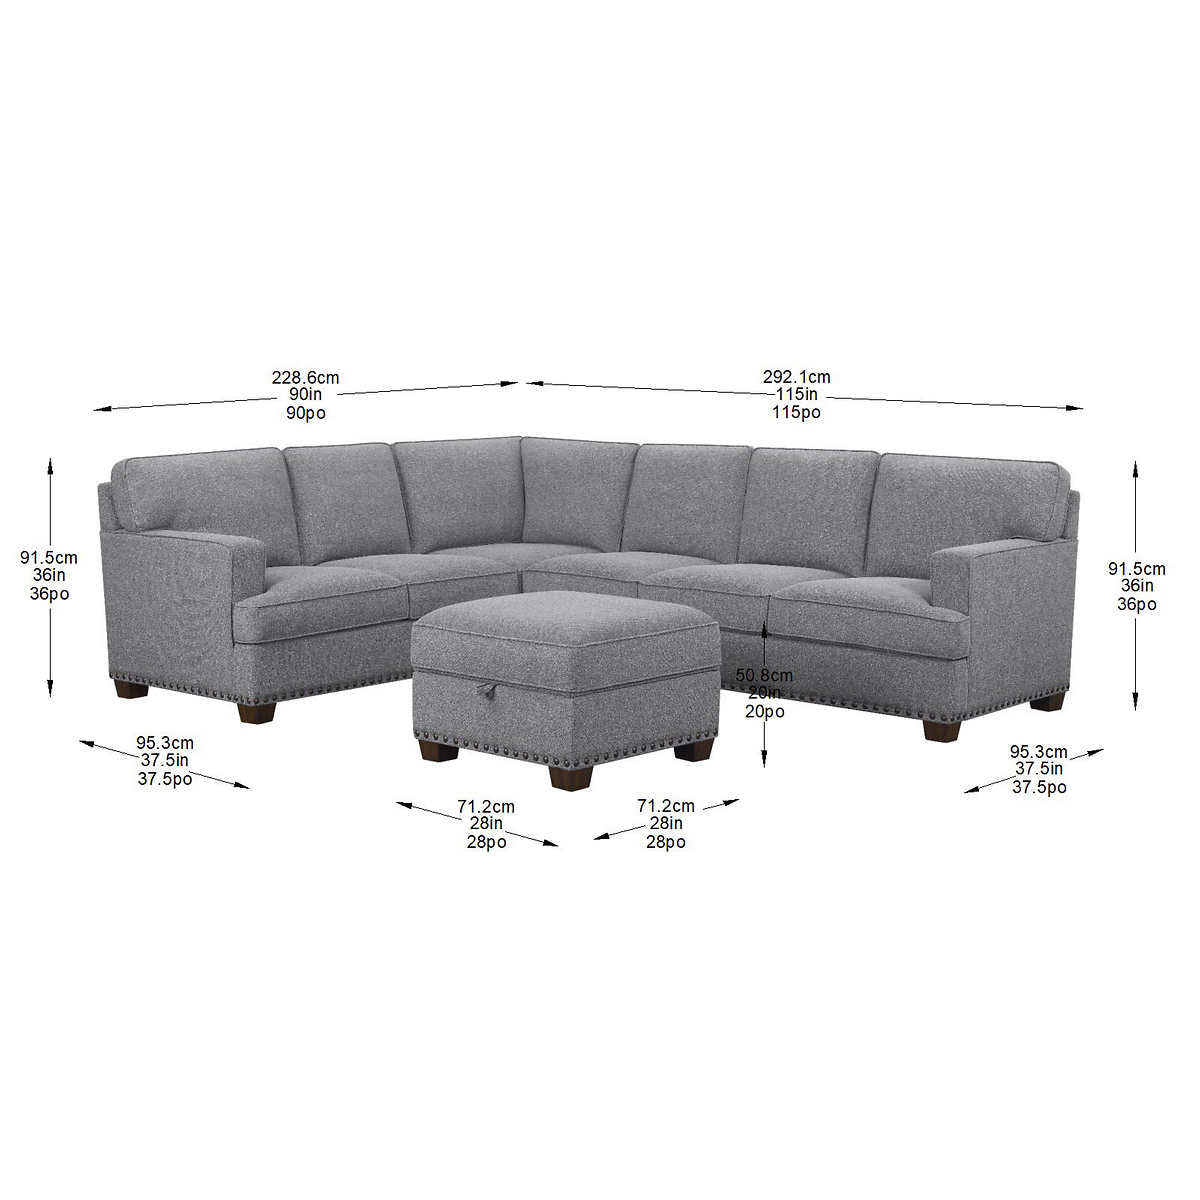 Like NEW - Costco - Thomasville Emilee Fabric Sectional with Storage Ottoman - Retail $1999